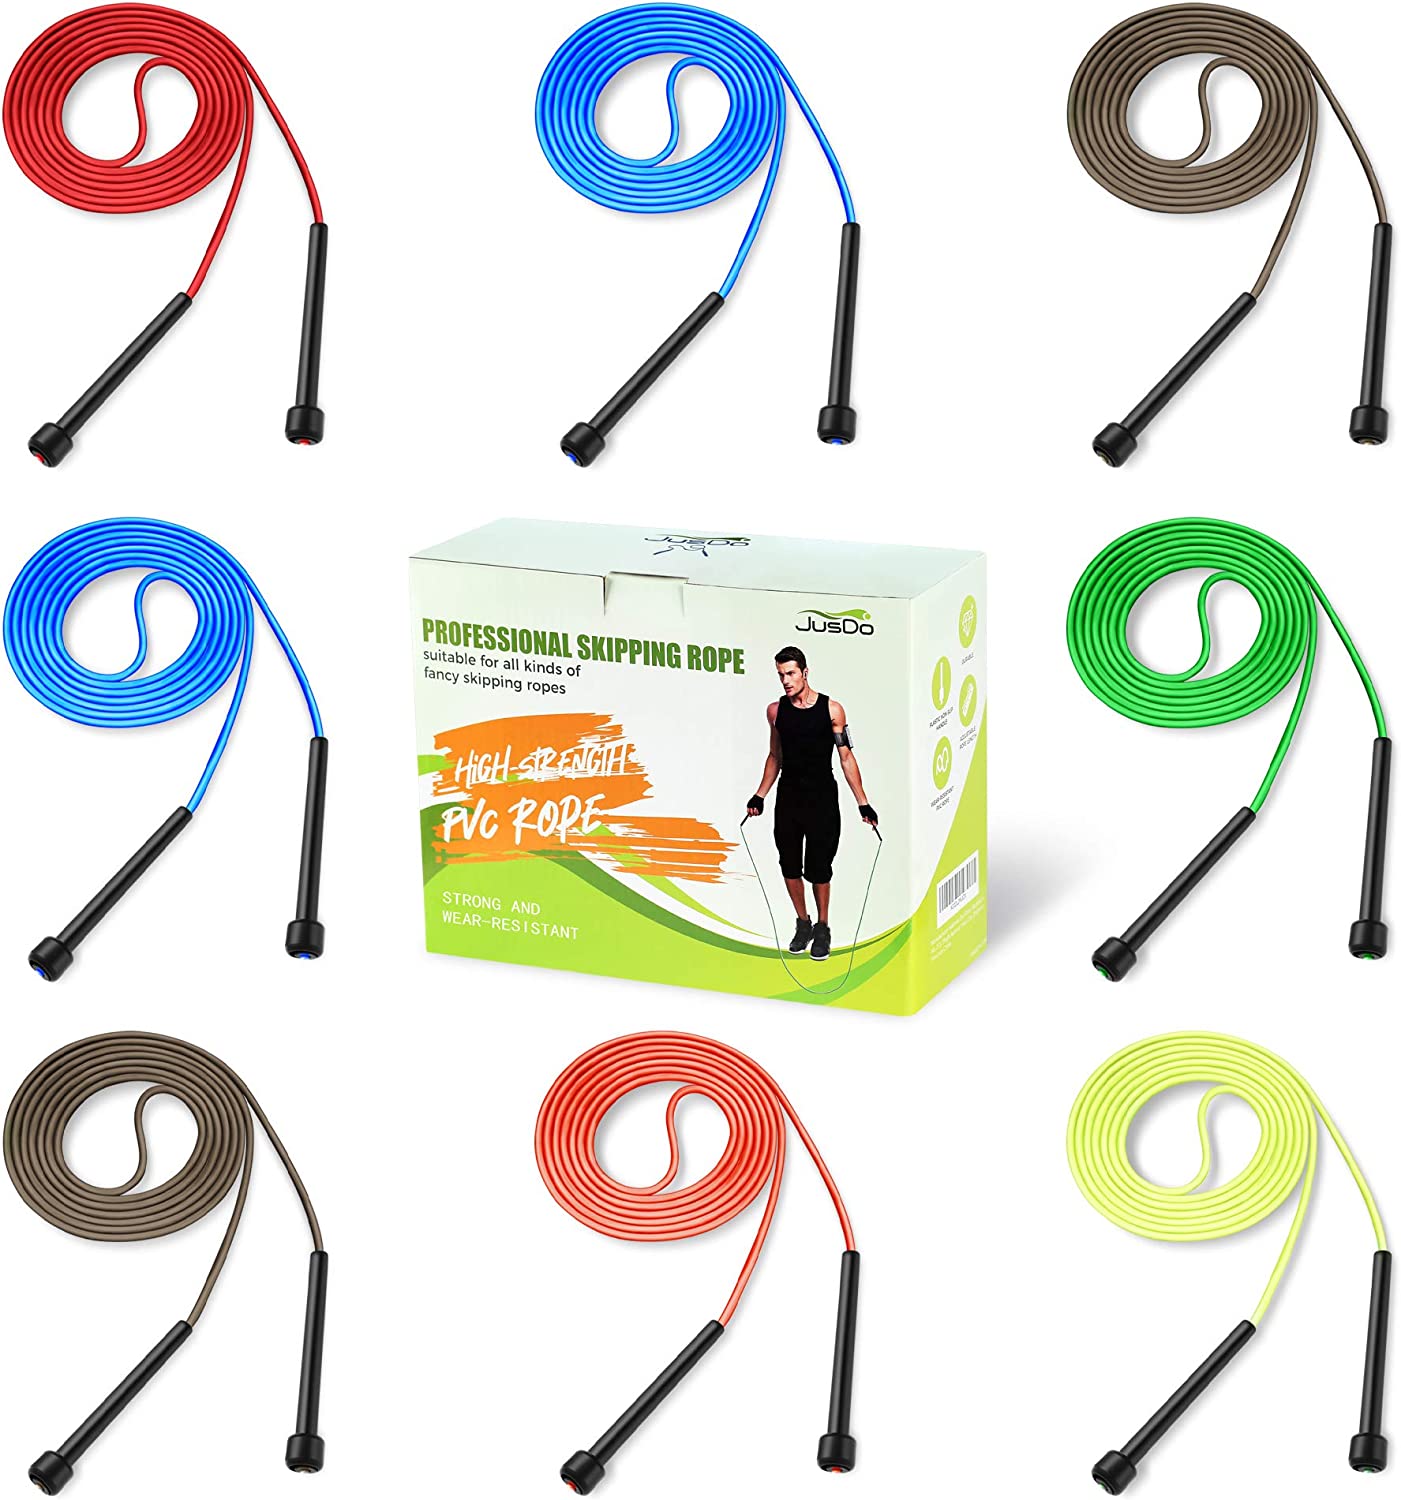 JUSDO 8 Pack Adjustable PVC Jump Rope for Cardio Fitness – Versatile Jump Rope for Both Kids and Adults Women Men Christmas Gift – Great Jump Rope for Exercise,9 Feet